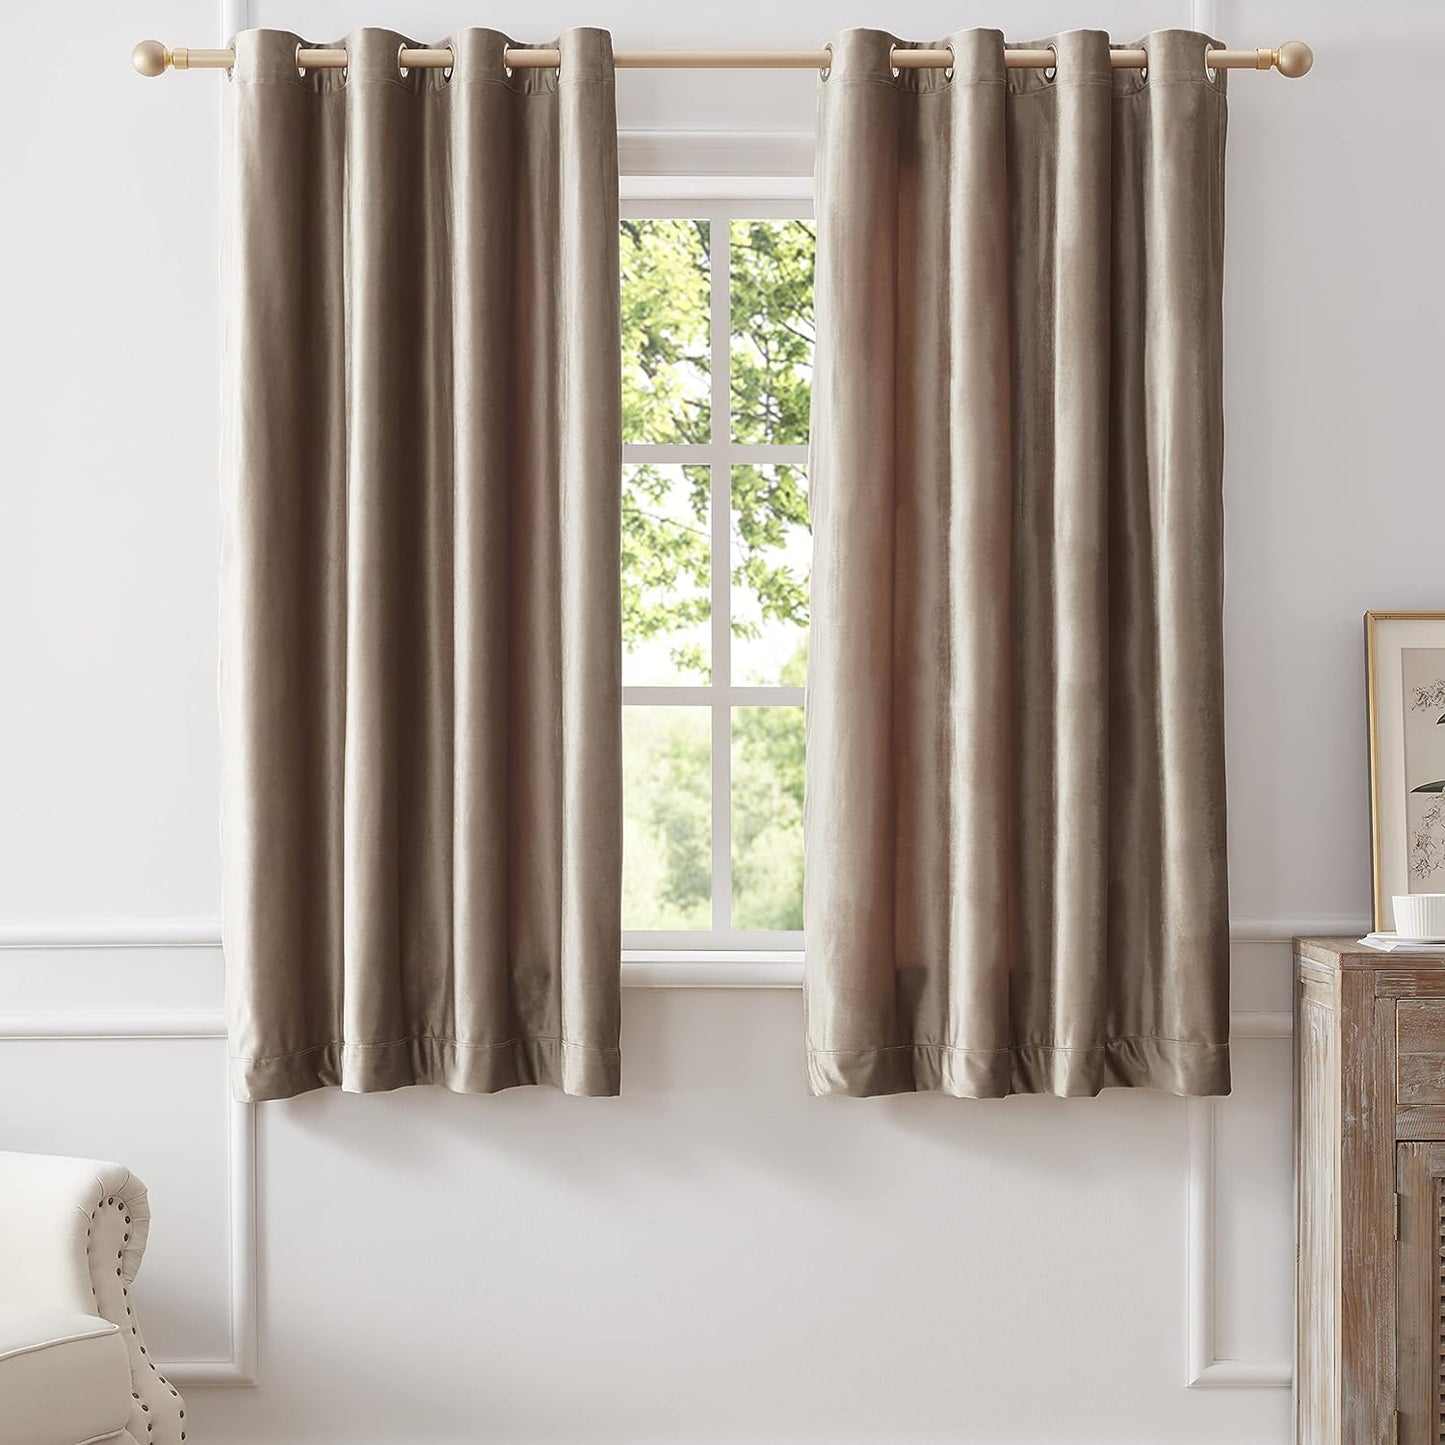 BULBUL Living Room Velvet Window Curtains 84 Inch Length- 2 Panels Hot Pink Blackout Window Drapes Curtains Thermal Insulated Room Darkening Decor Grommet Curtains for Bedroom  BULBUL Taupe 52"W X 63"L 